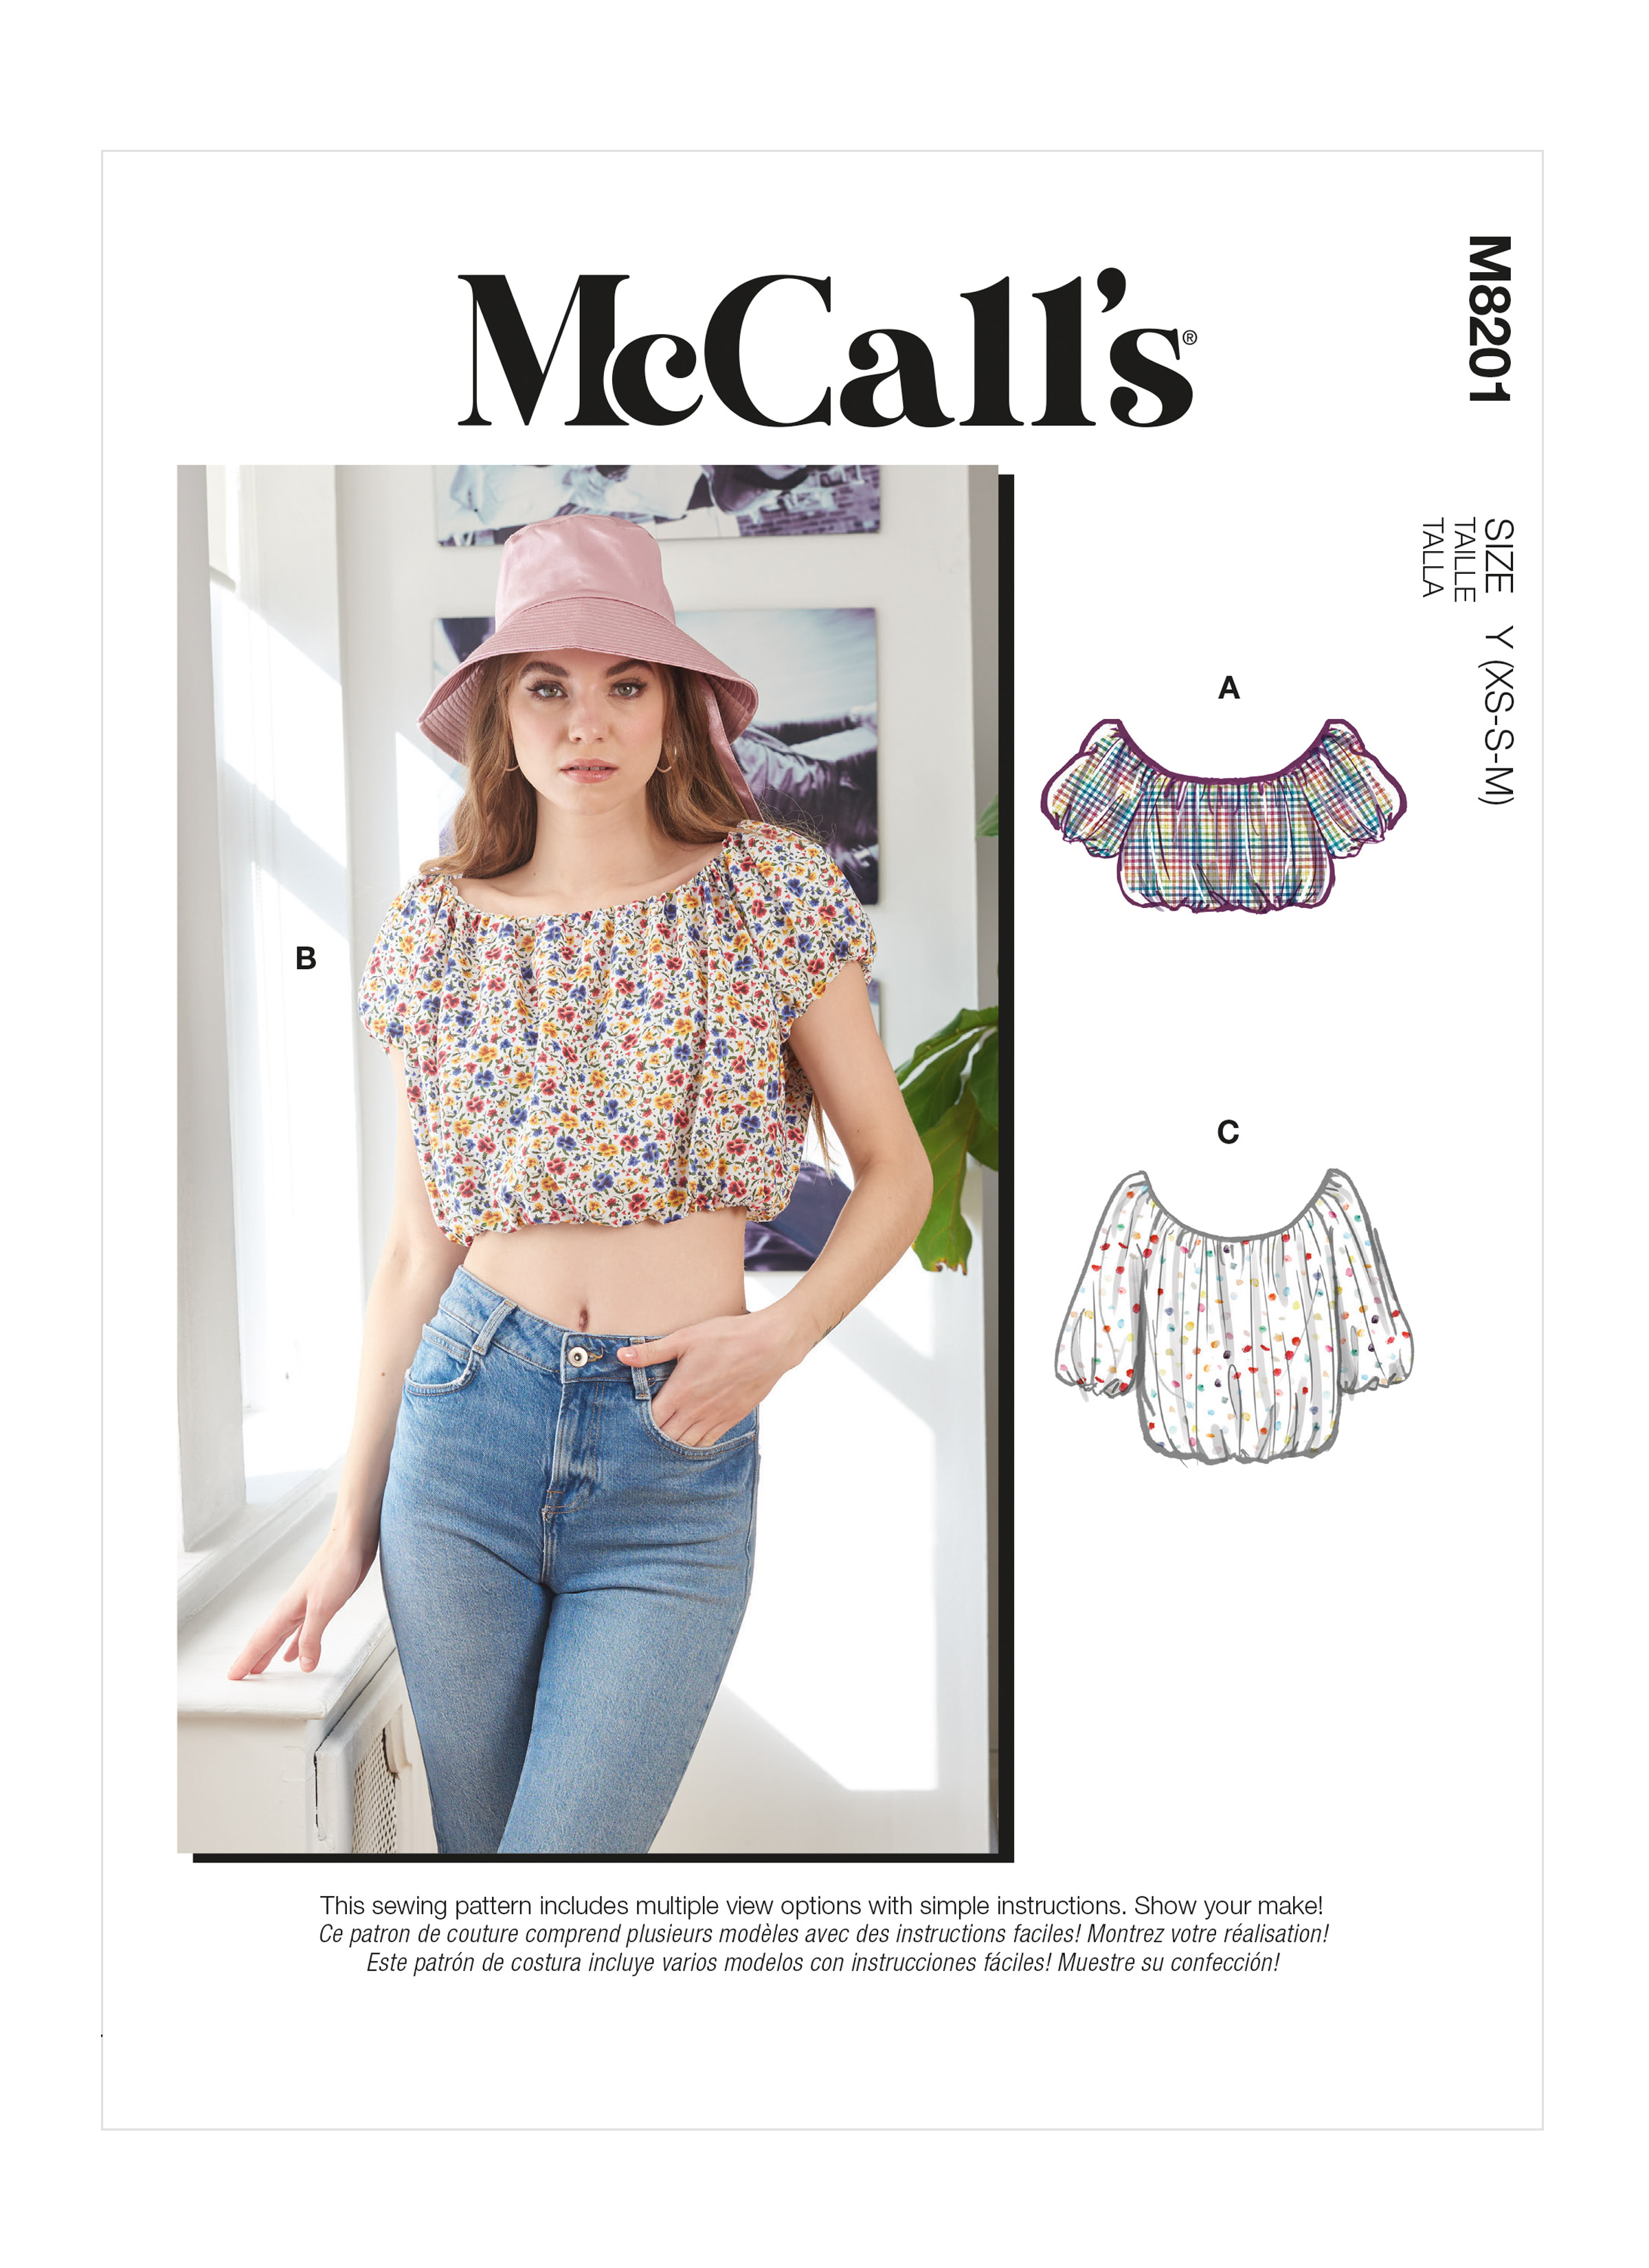 Wardrobe Trends - Crop Tops for Everybody 8/3/22 - PatternReview